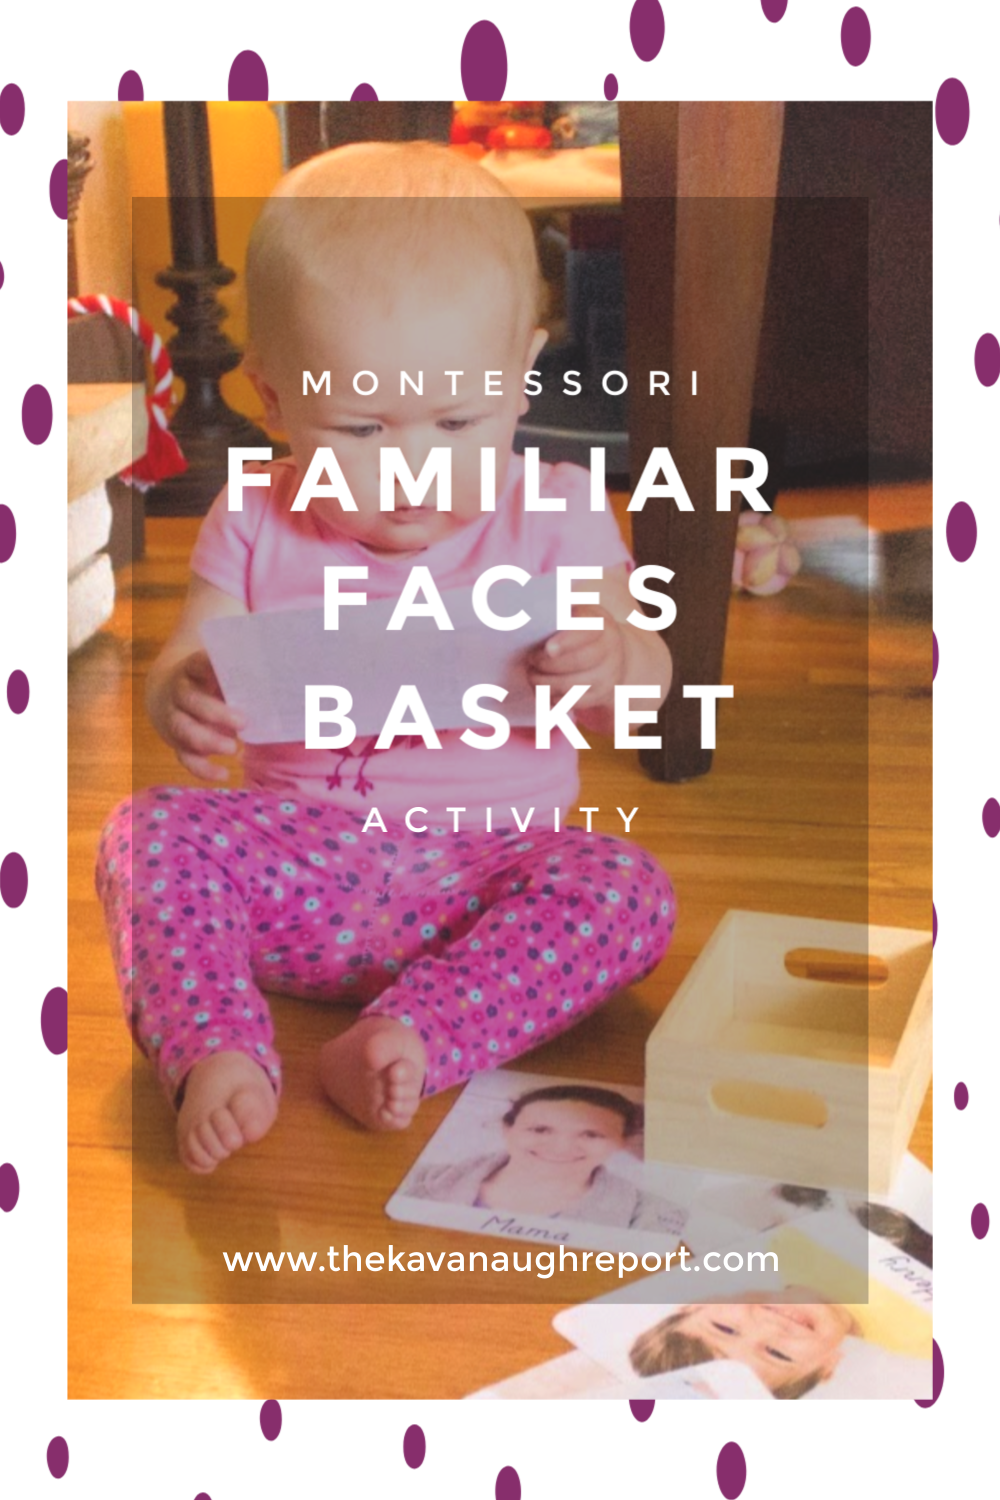 Montessori friendly familiar faces basket - an easy DIY for babies and toddlers to recognize family members